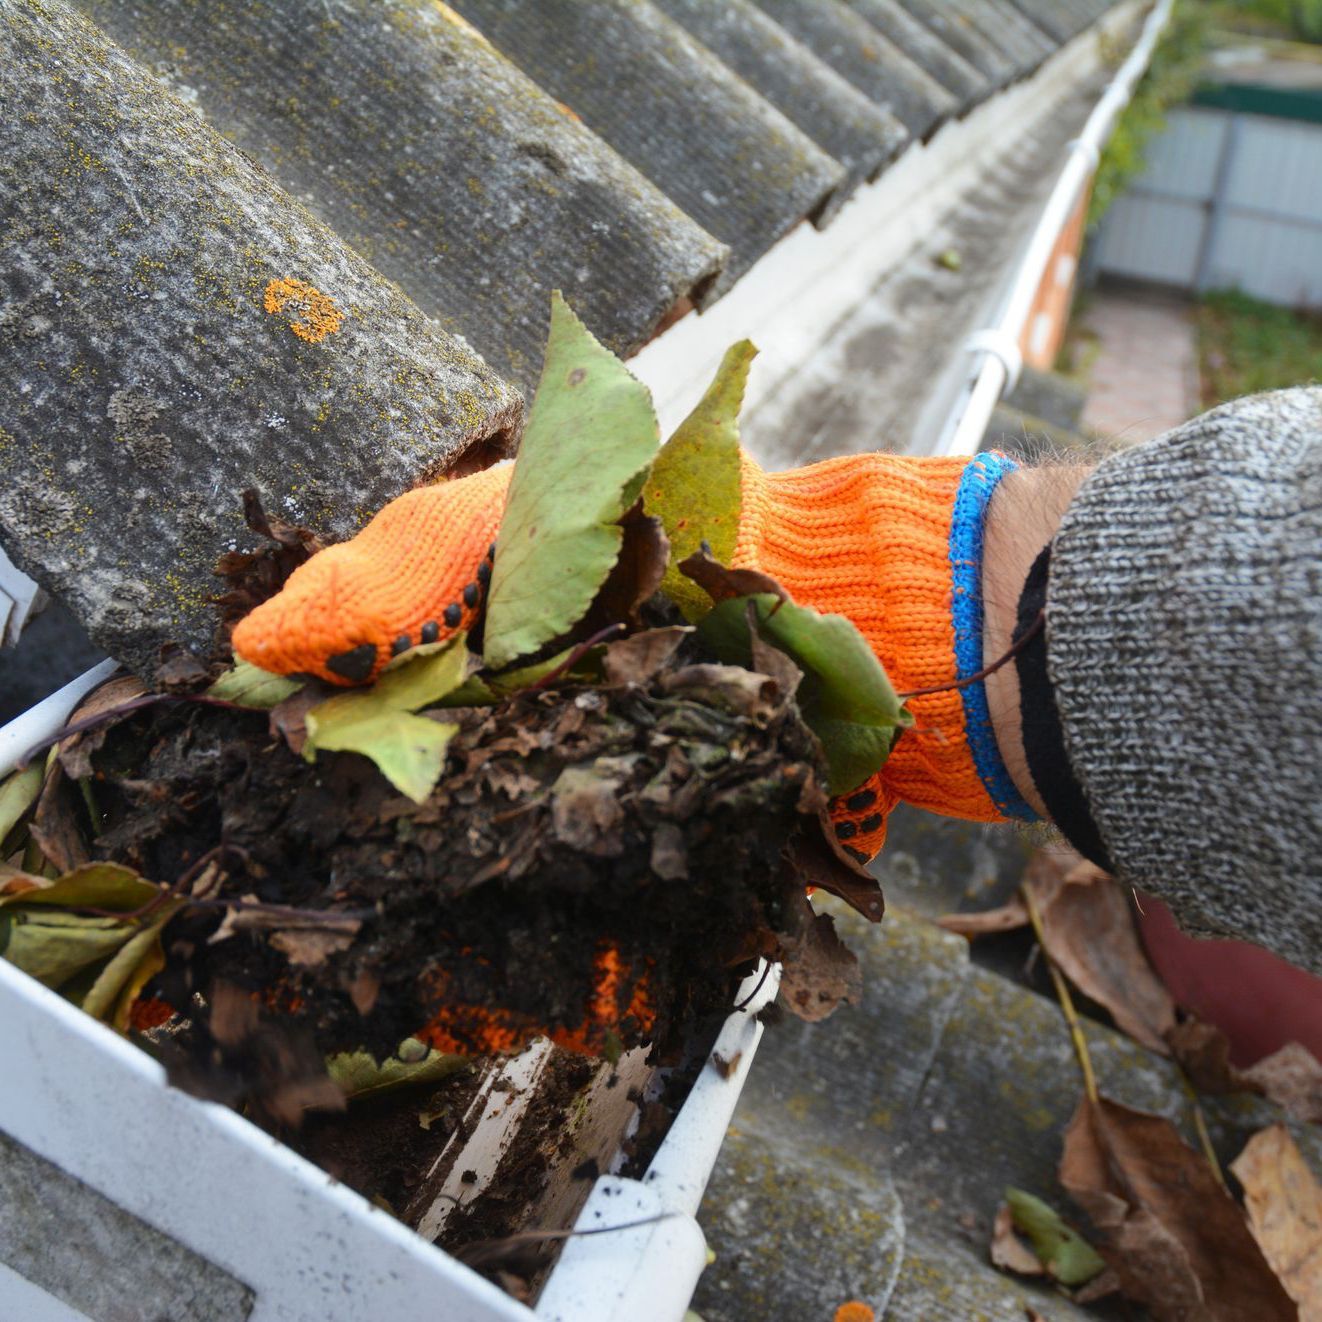 a person wearing orange gloves is cleaning a gutter